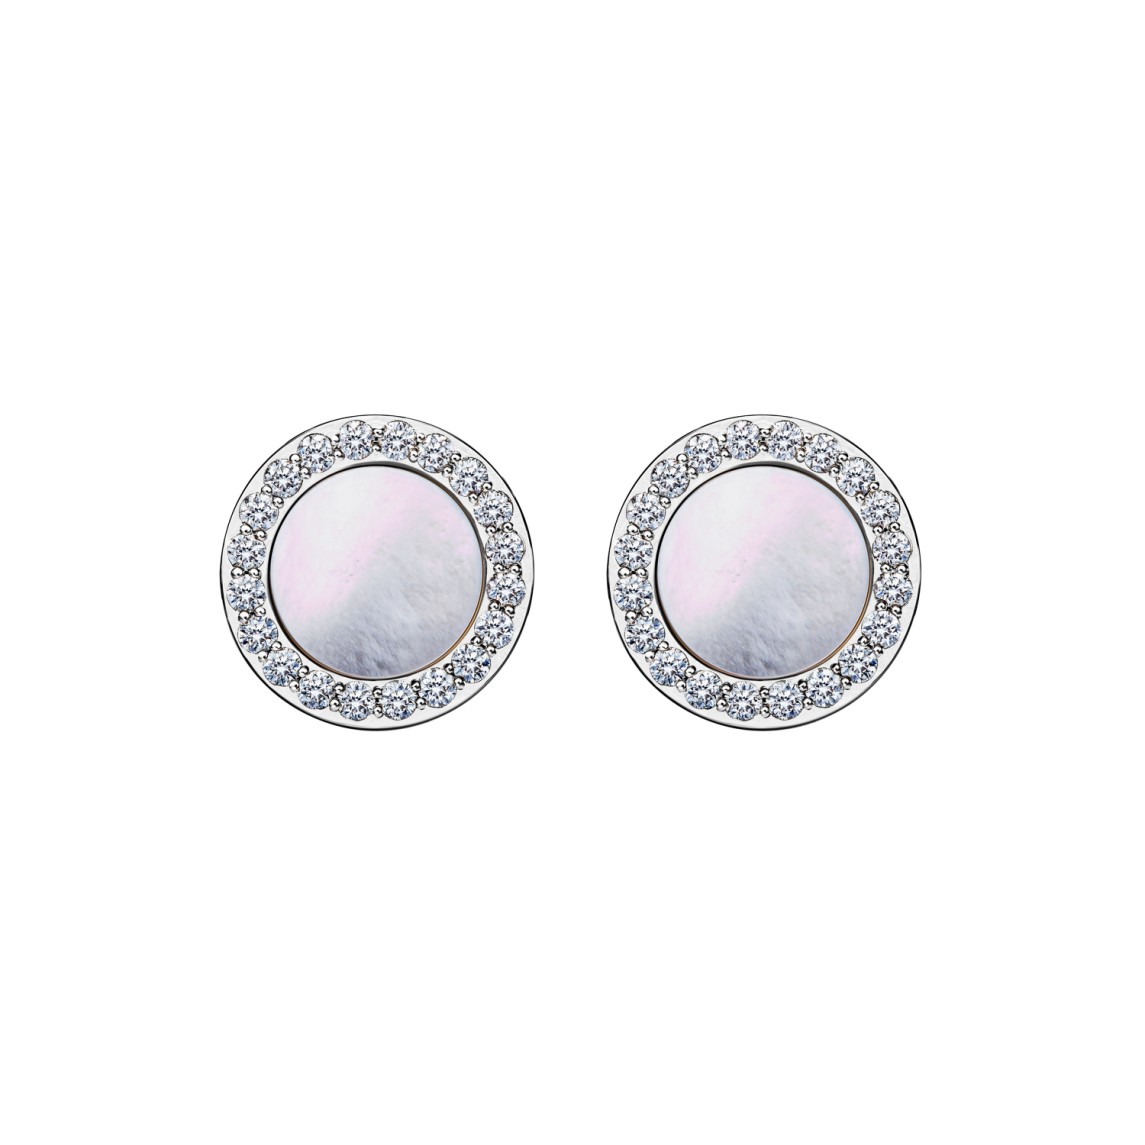 White Gold Earrings With Diamonds And Mother Of Pearl